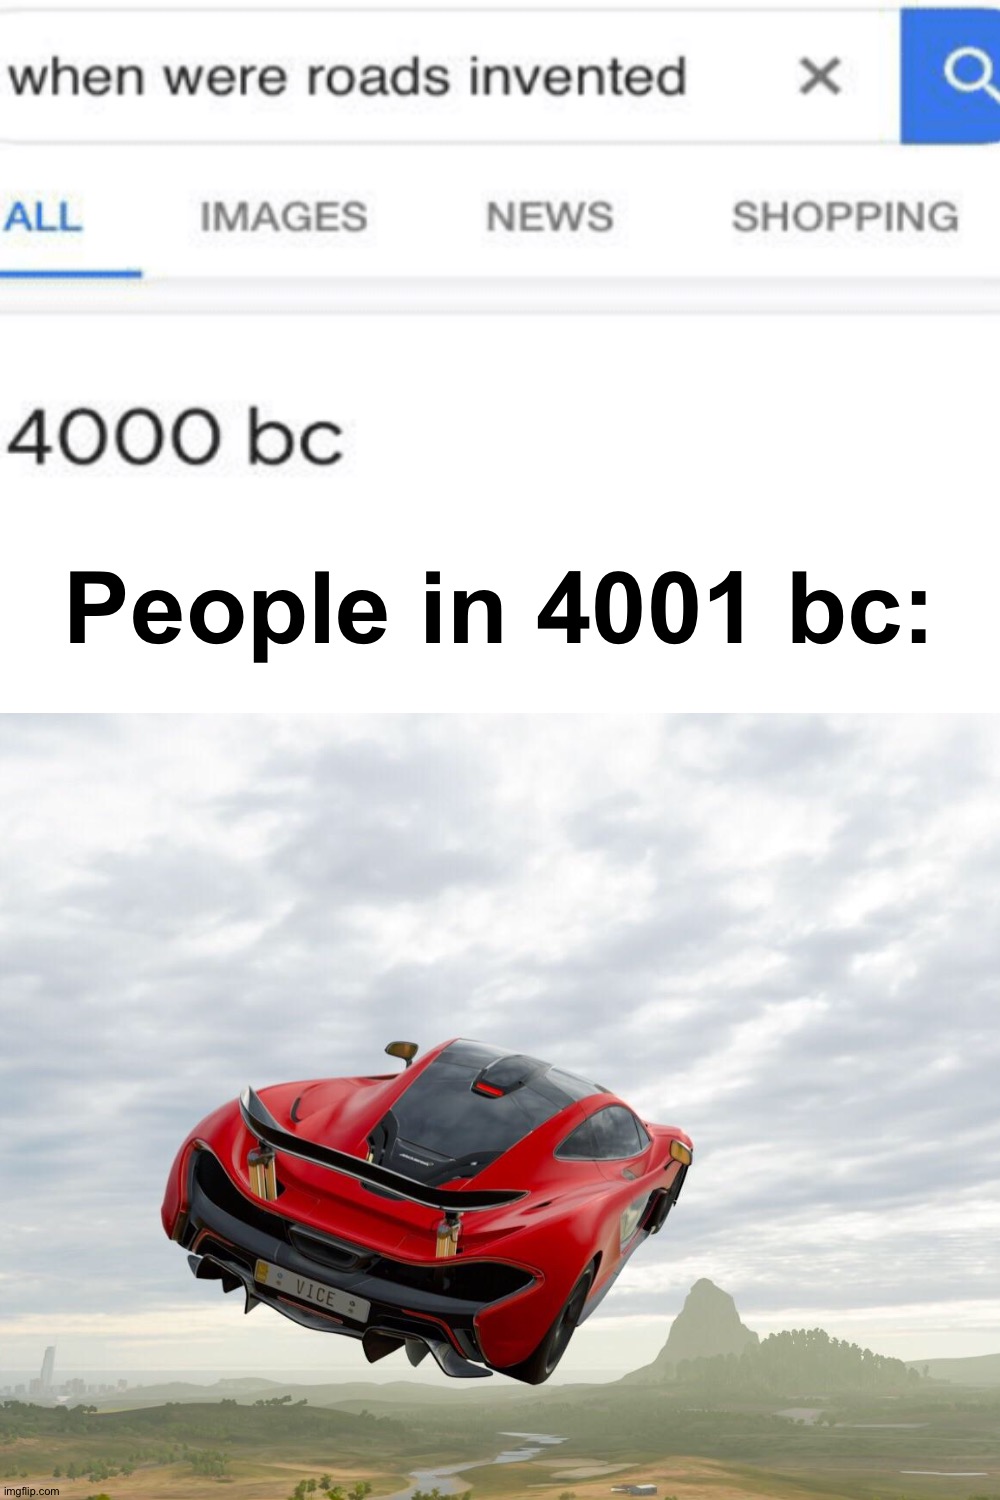 Guess that's when flying cars were invented... Hopefully not a single snowflake would ruin this meme like last time | People in 4001 bc: | image tagged in memes,blank transparent square,funny,funny memes,wtf,dank memes | made w/ Imgflip meme maker